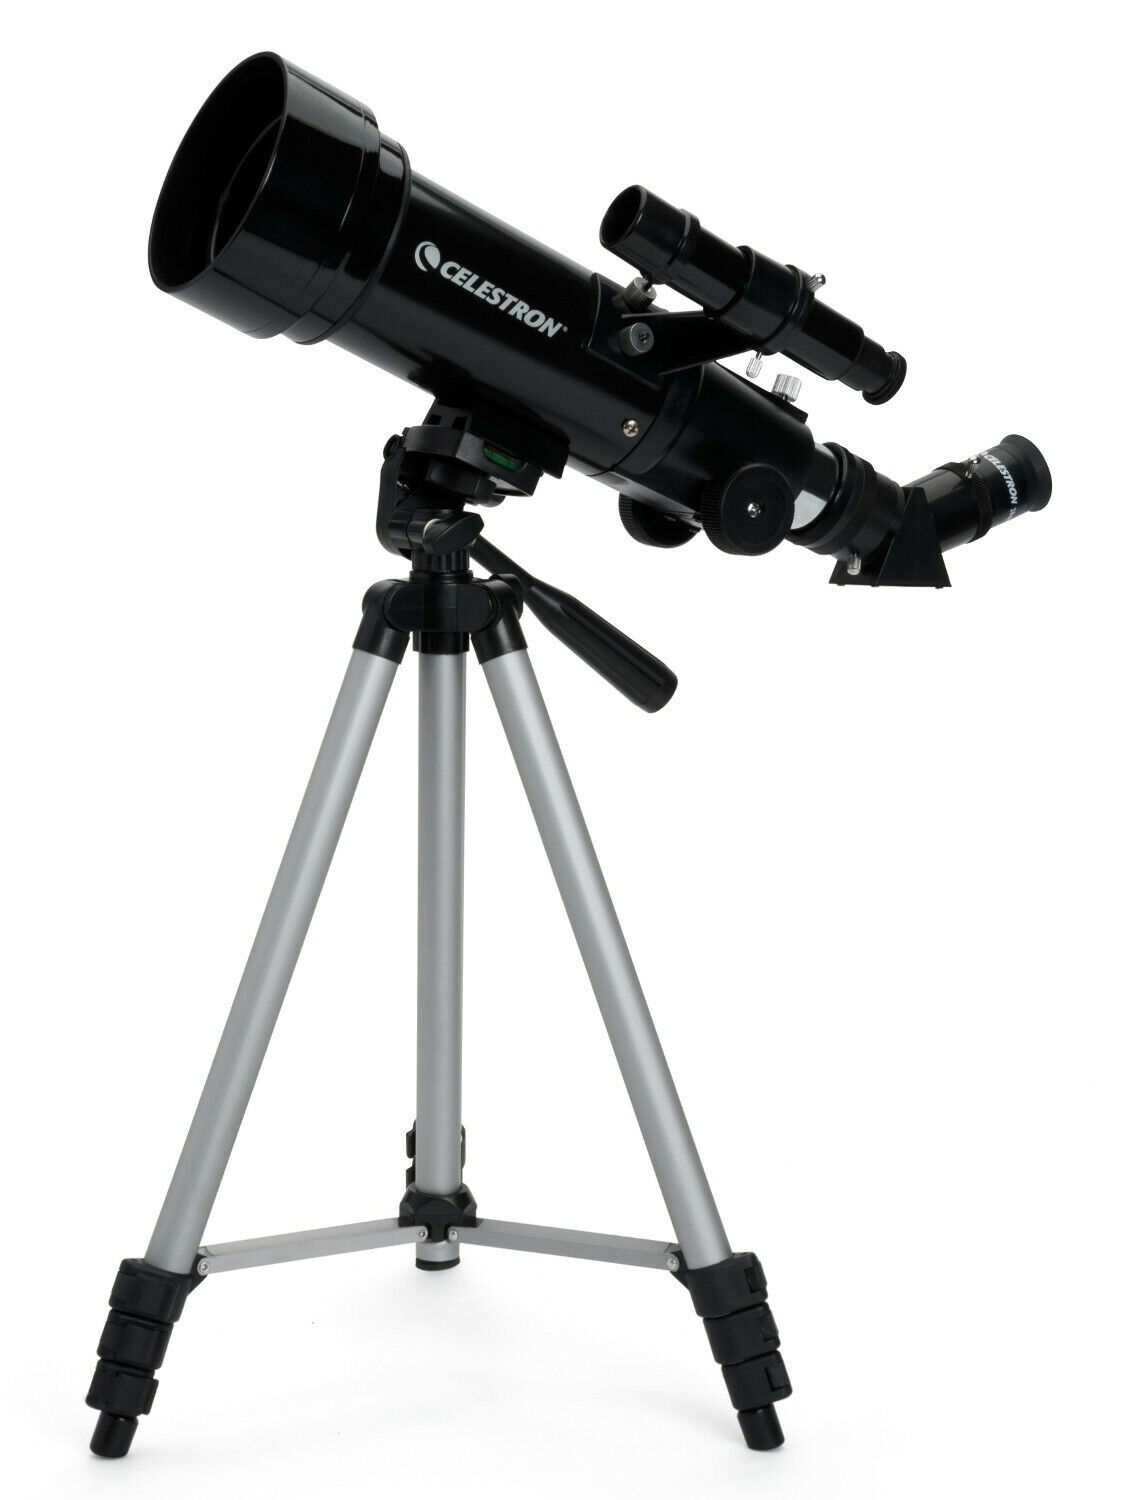 Celestron 70mm Travel Scope with Backpack